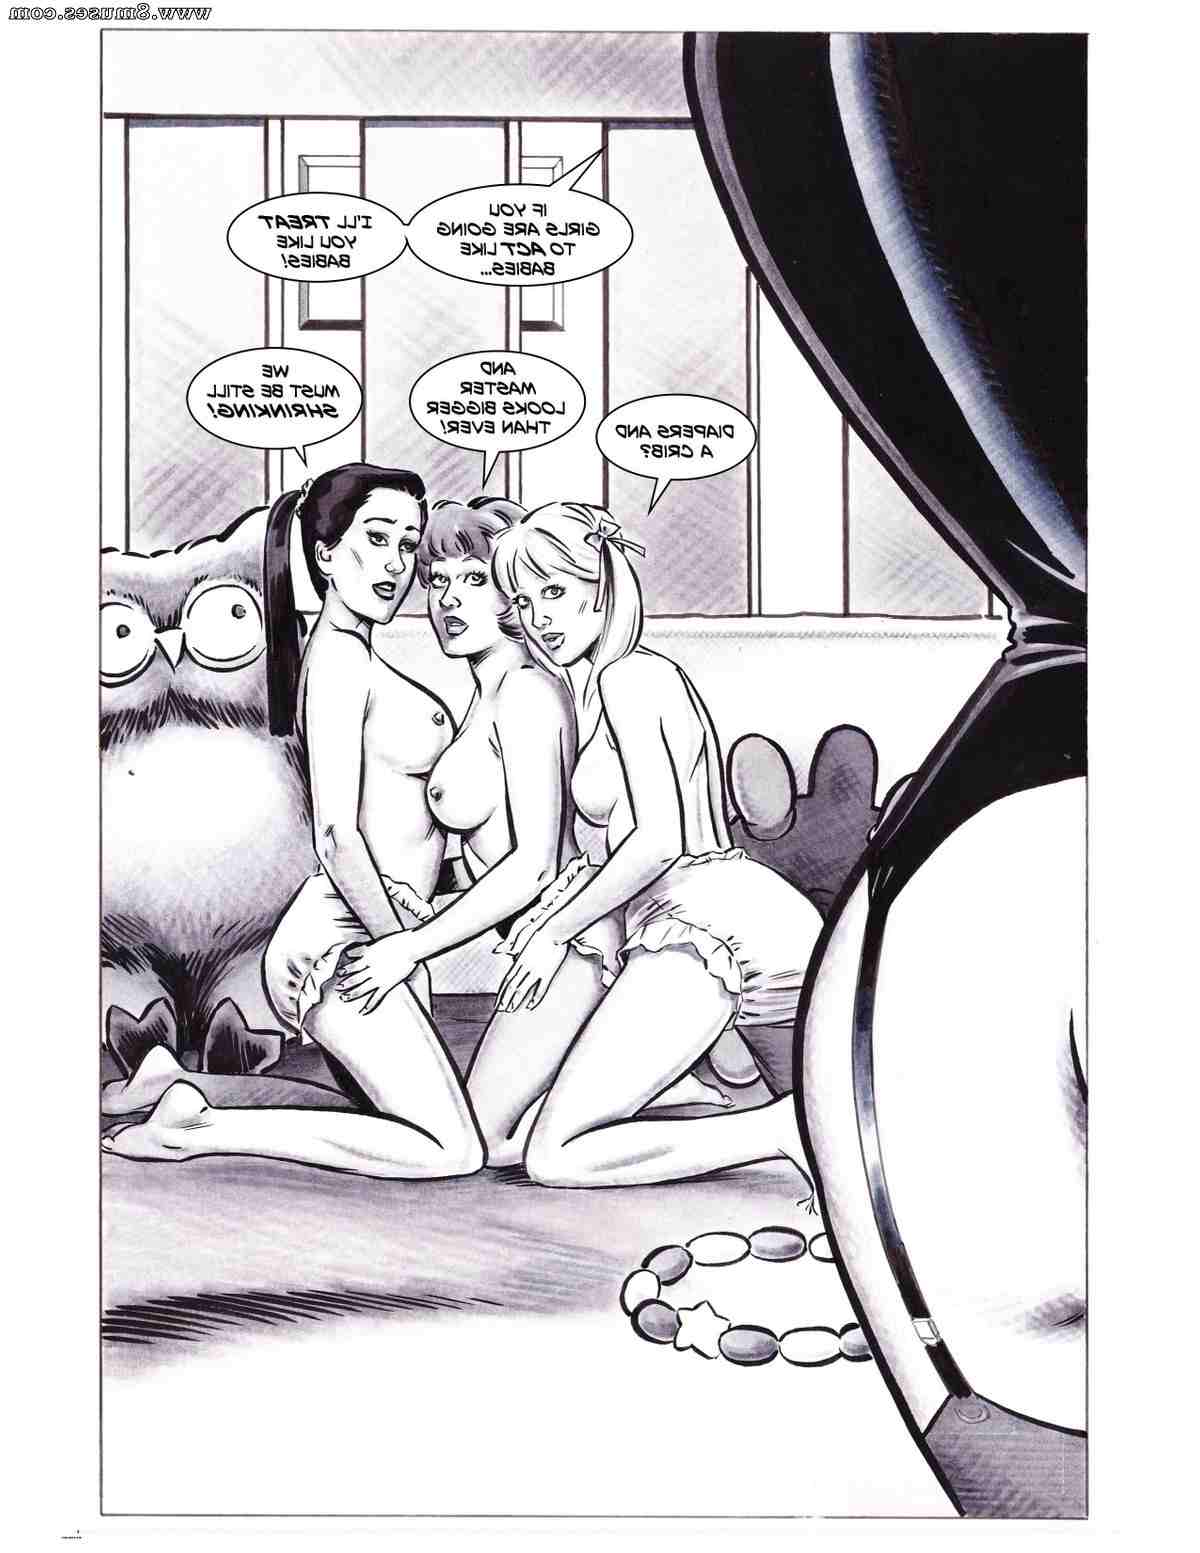 DreamTales-Comics/College-Bound College_Bound__8muses_-_Sex_and_Porn_Comics_11.jpg